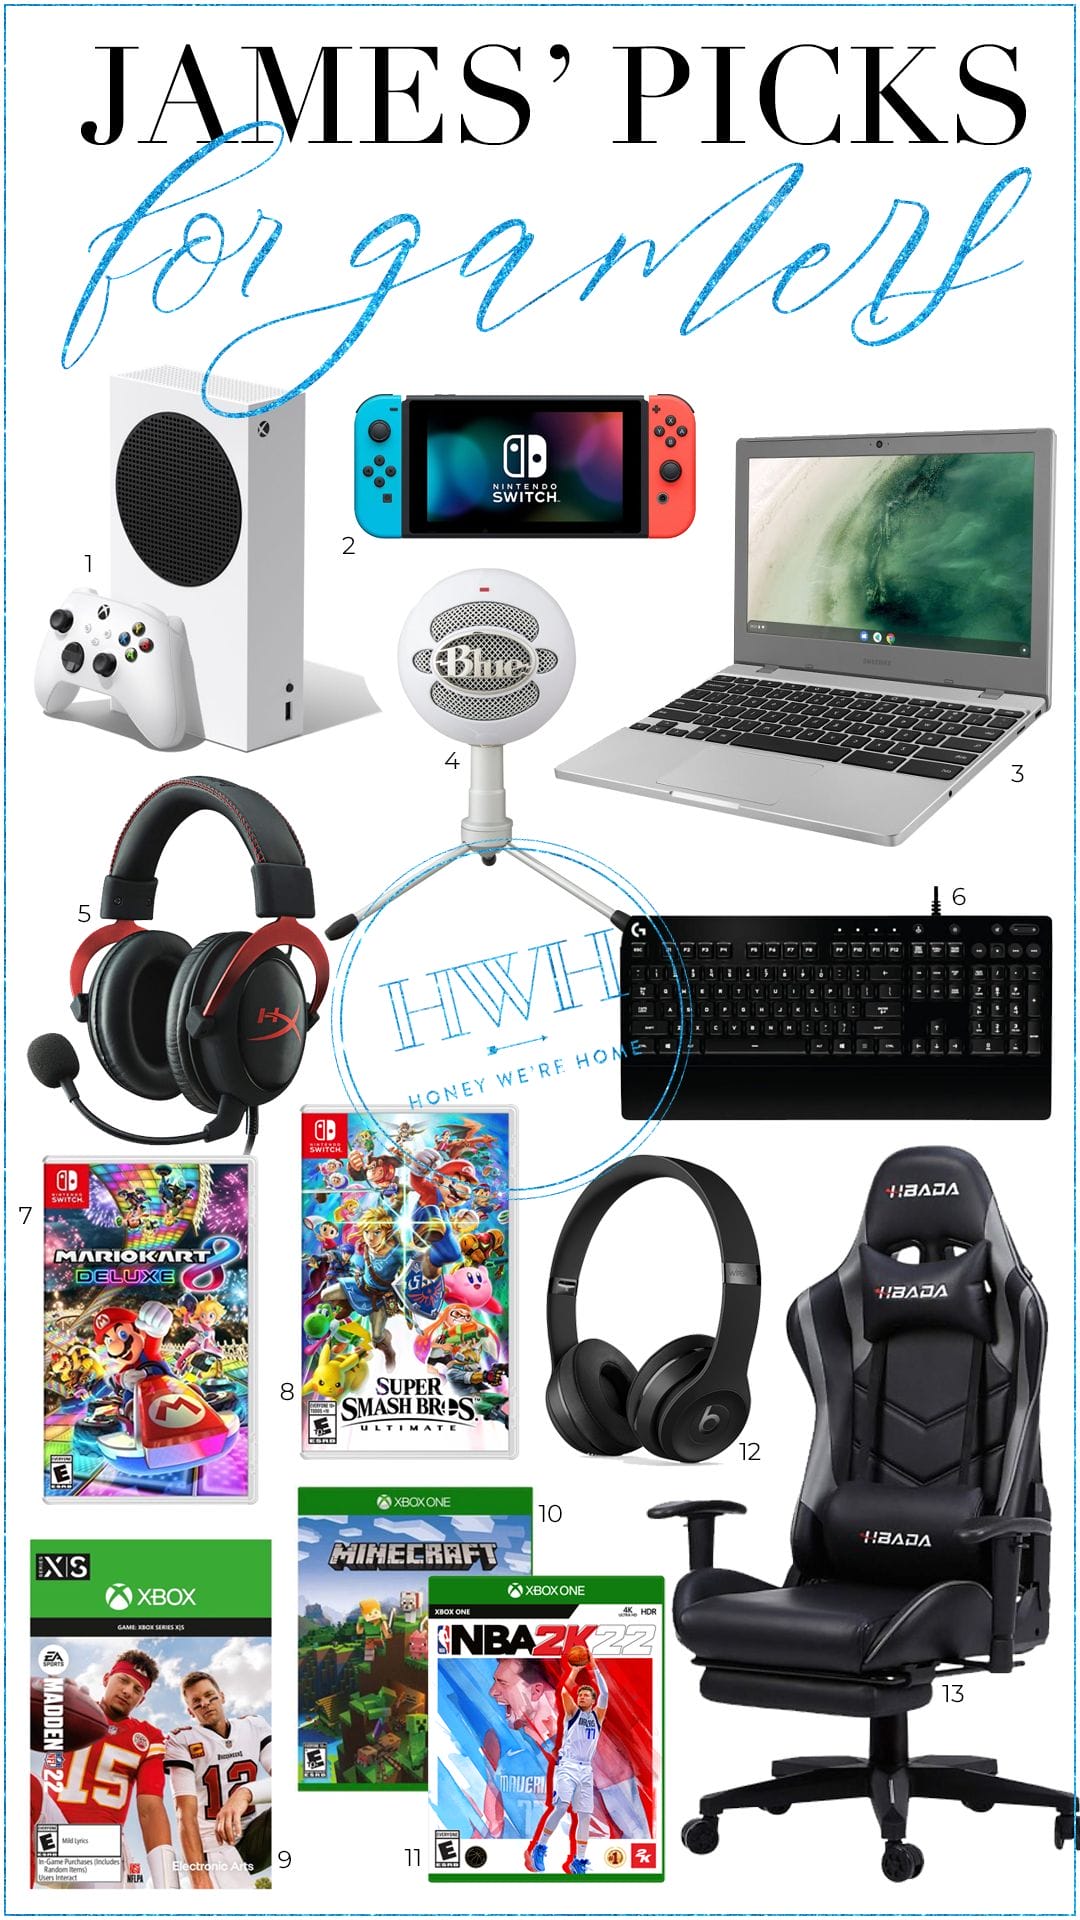 15 Kid-Friendly Gaming Gifts Your Young Gamer Will Love - Sunshine Whispers